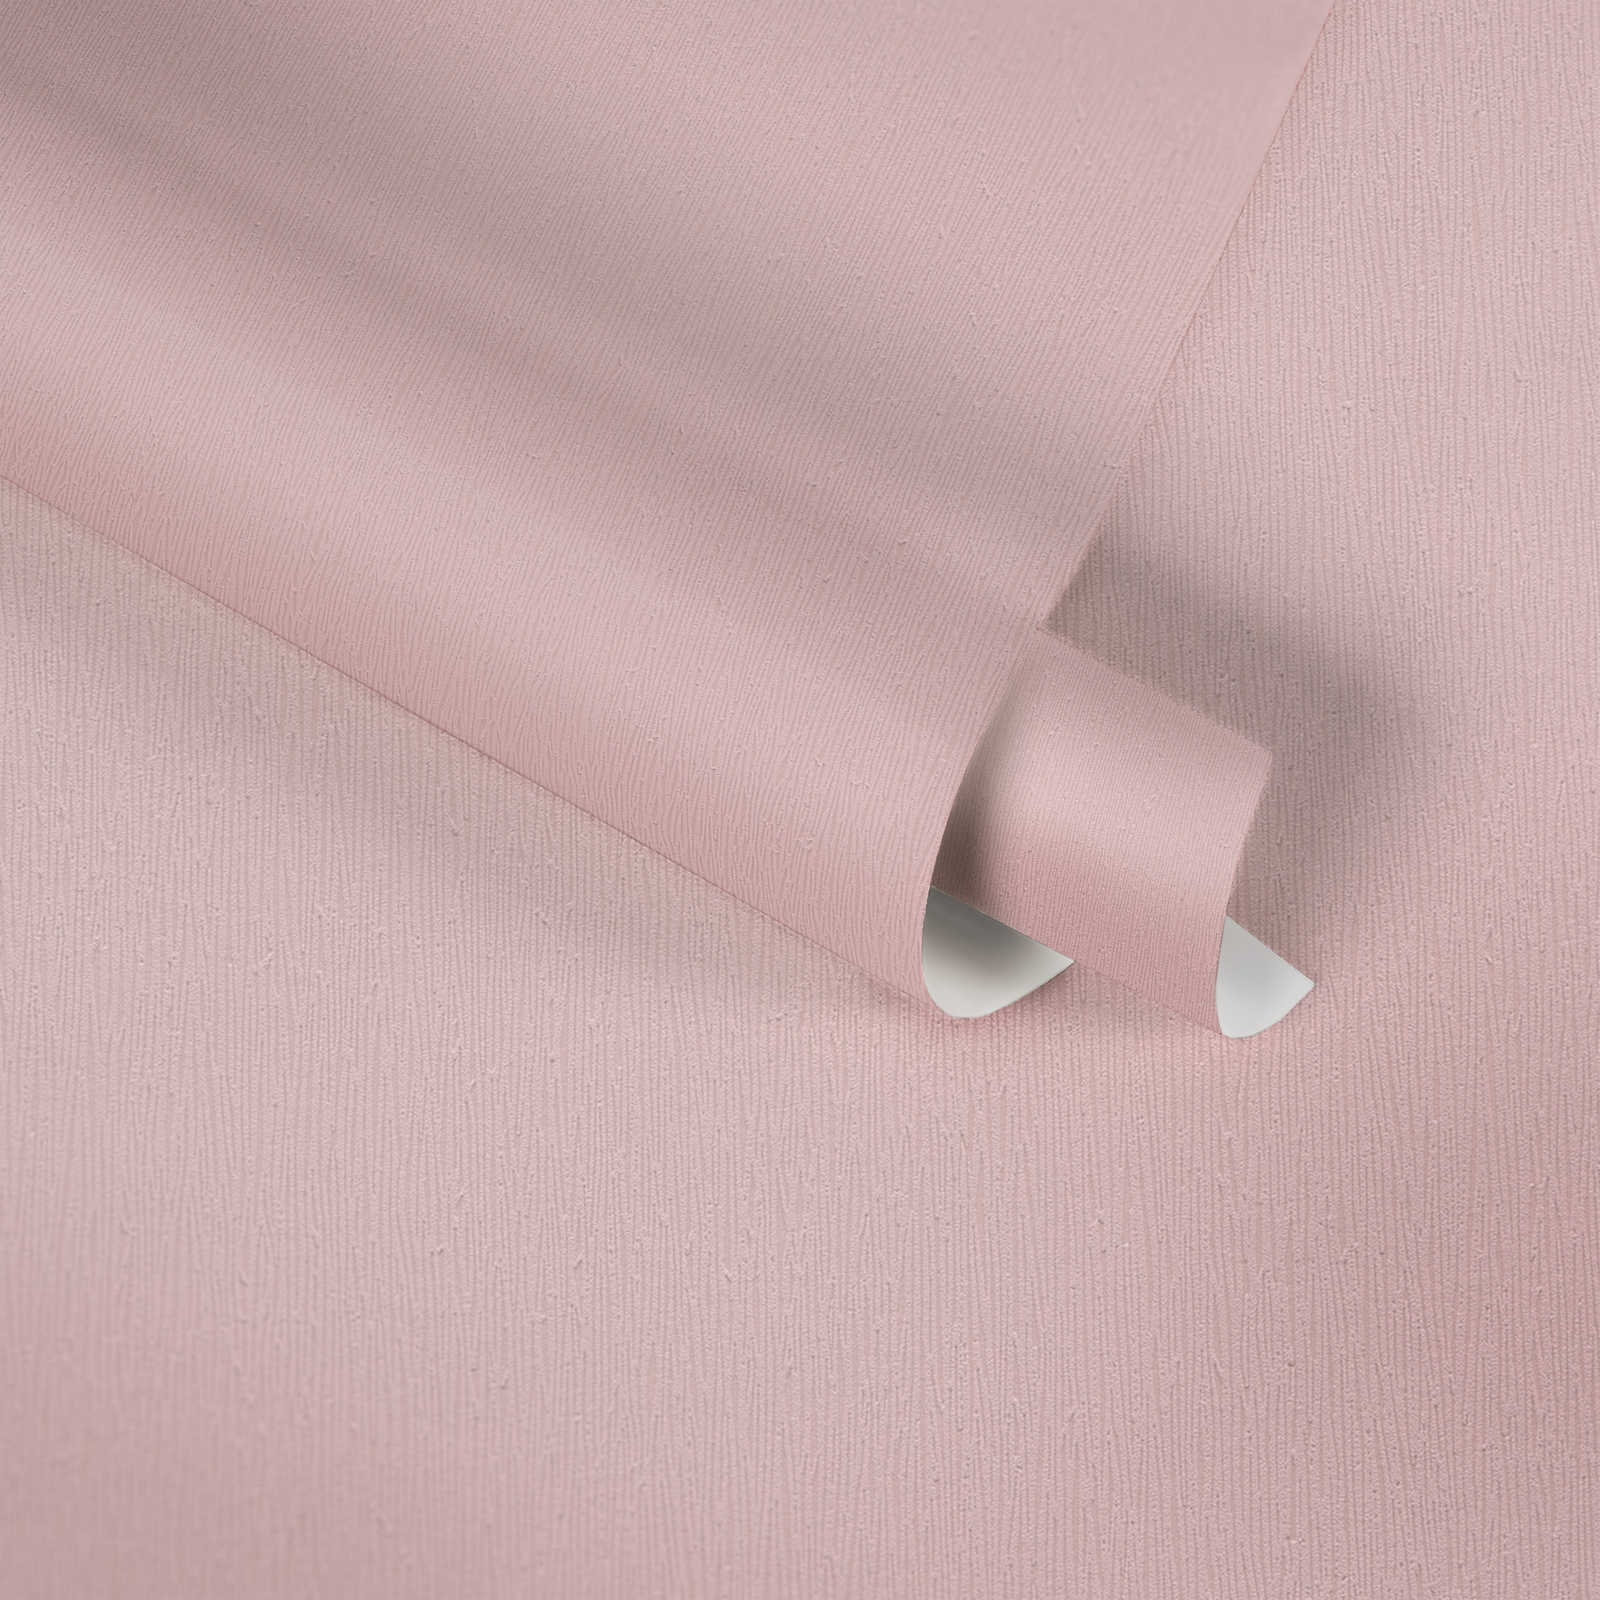             Baby pink non-woven wallpaper with plain texture design - pink
        